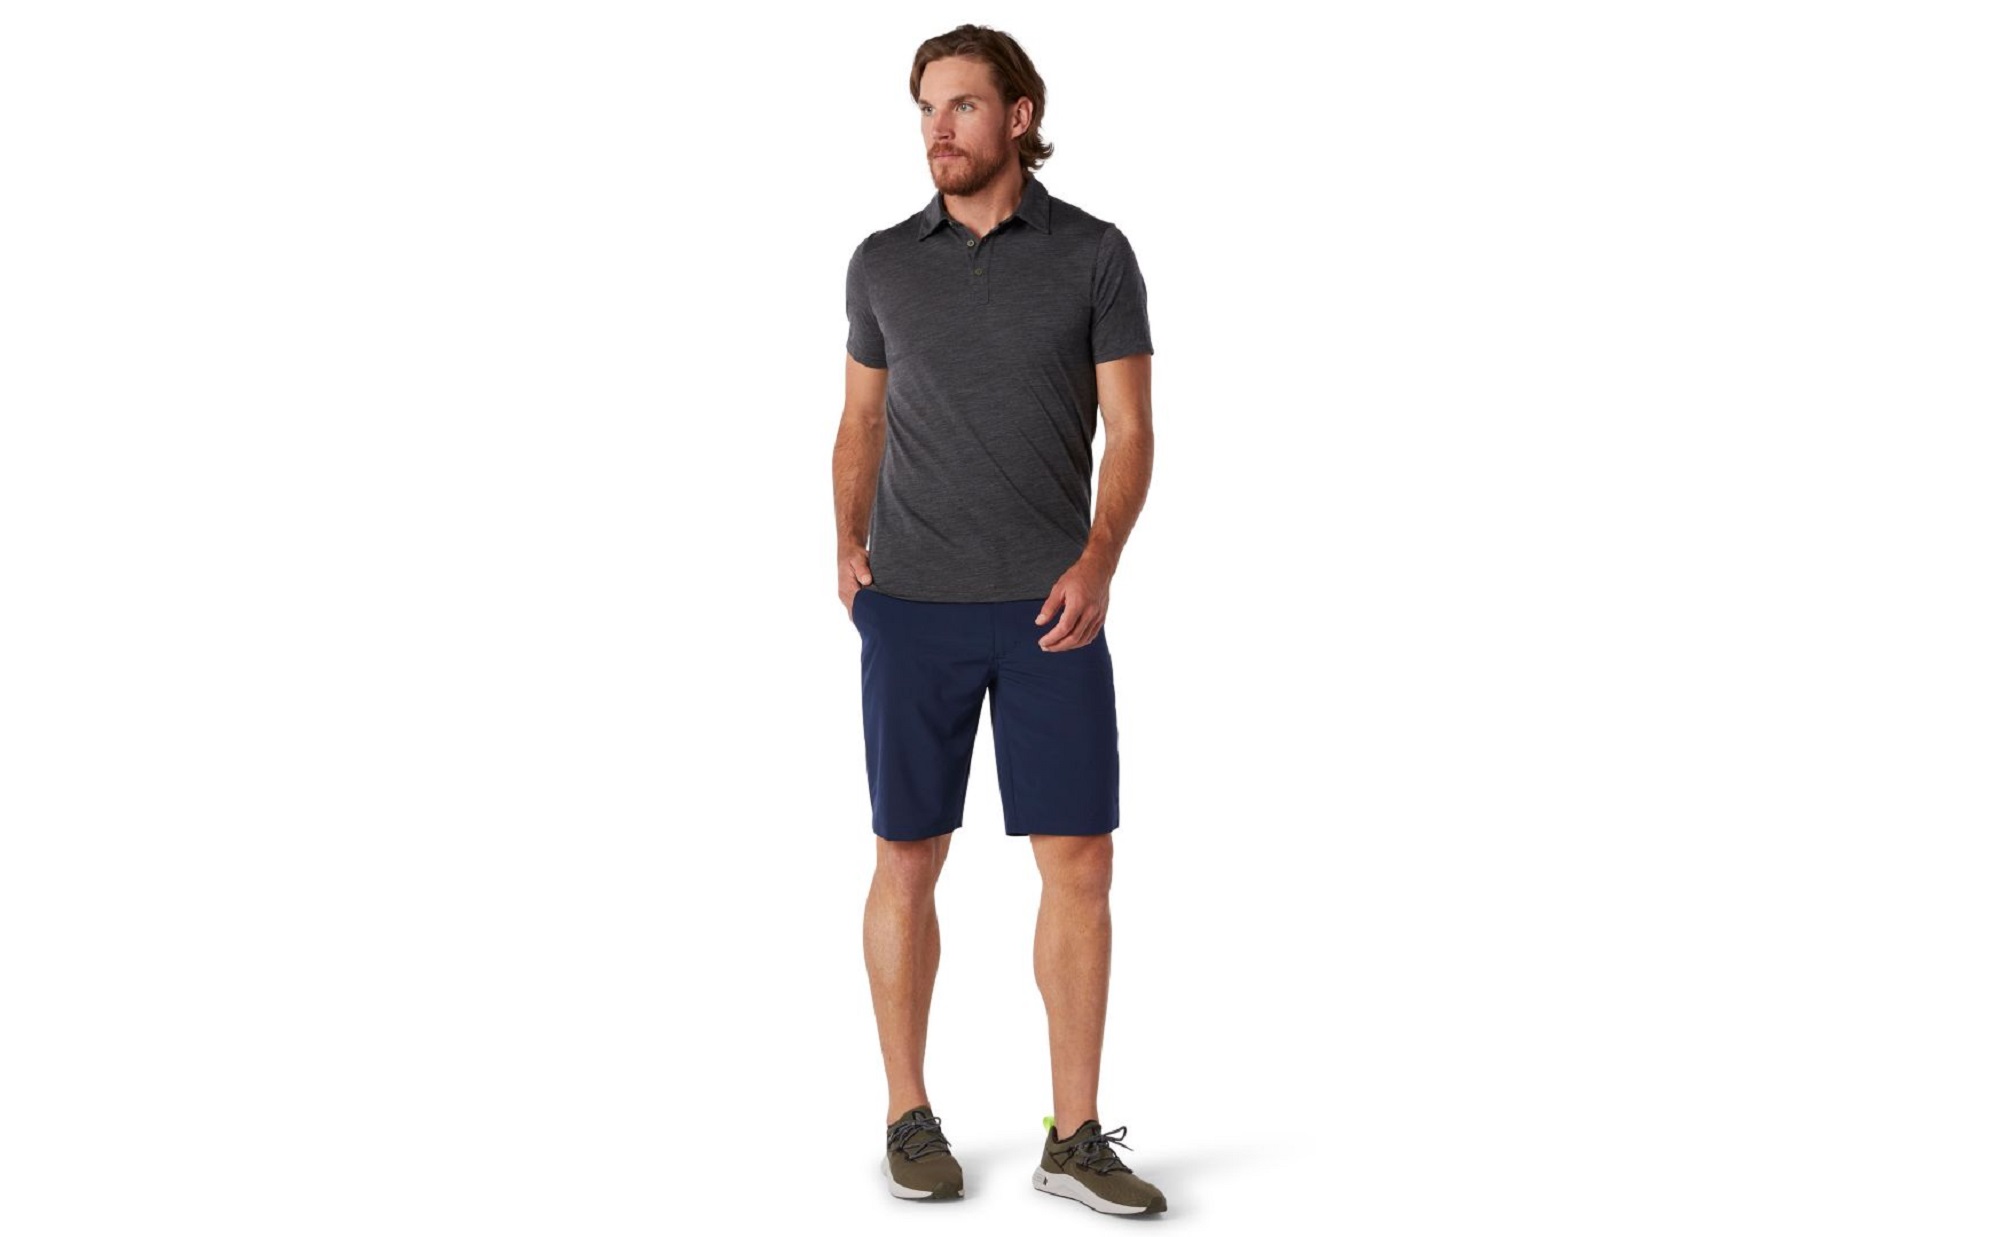 Man wearing a Smartwool polo, shorts, and sneakers